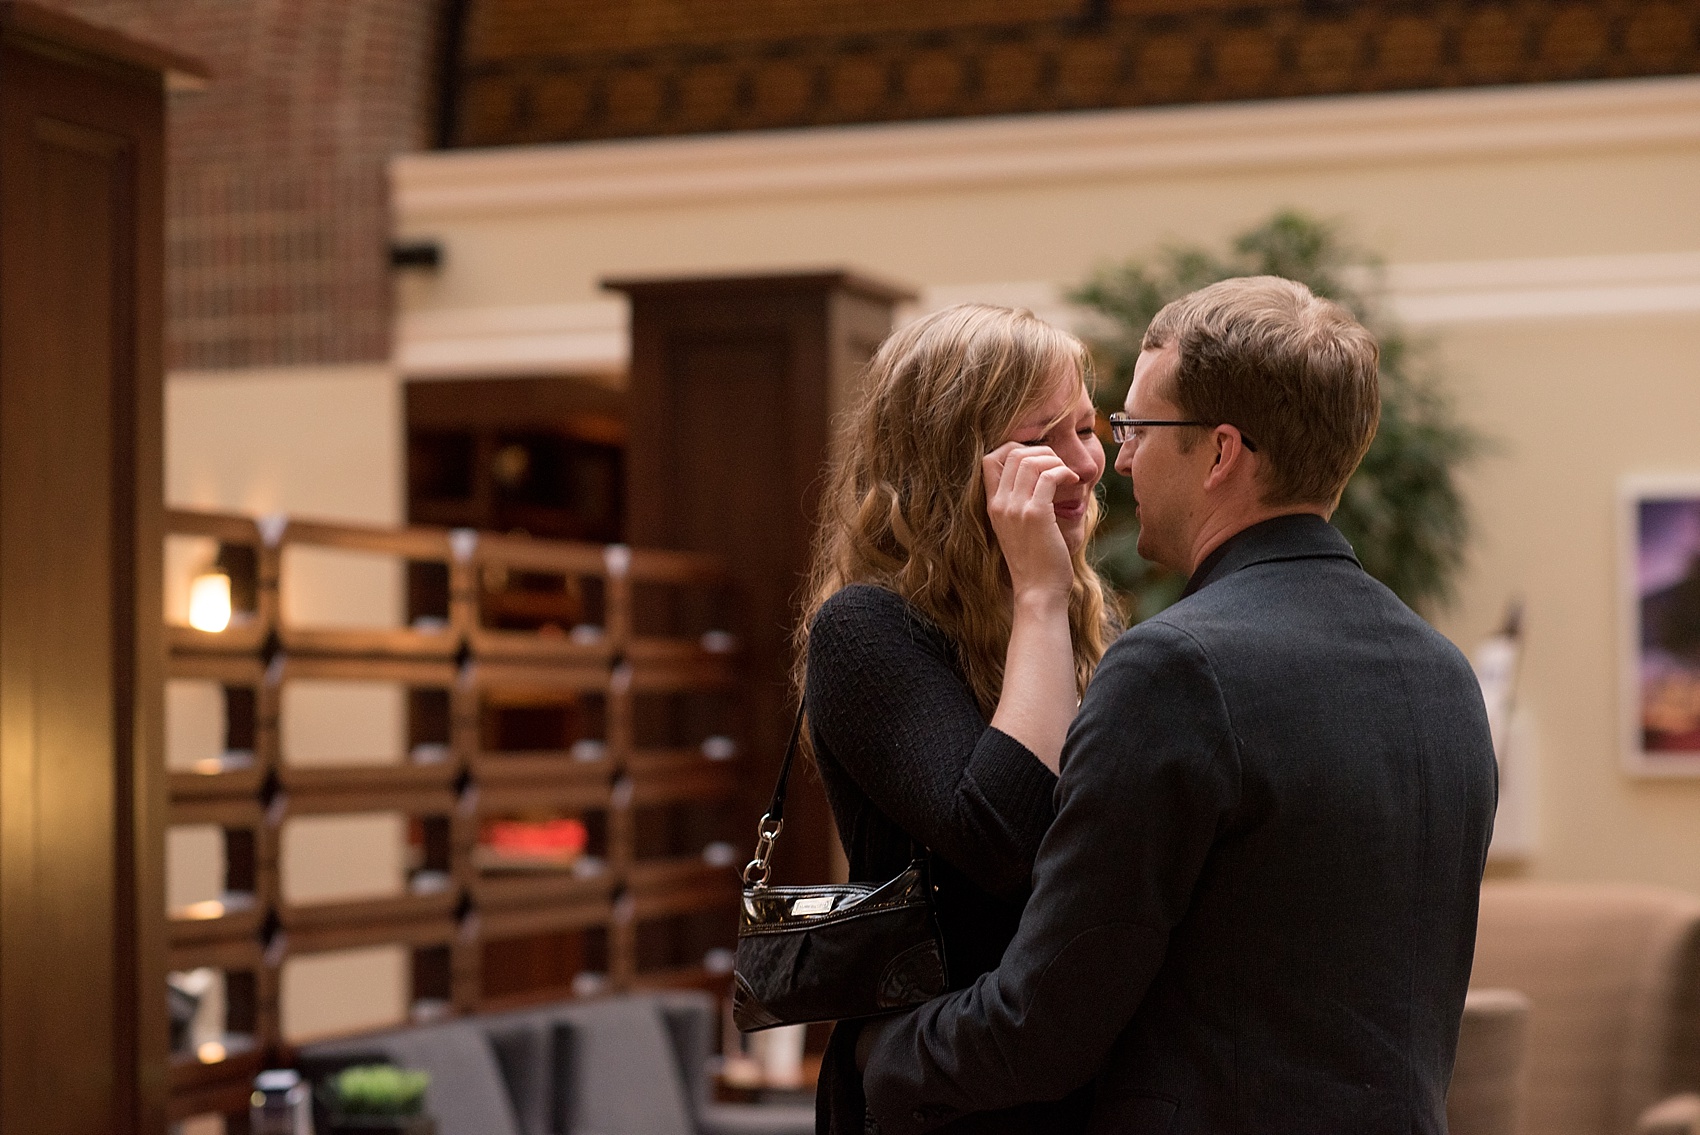 Raleigh wedding photographer, Mikkel Paige Photography, captures downtown #proposal at the Sheraton hotel. 